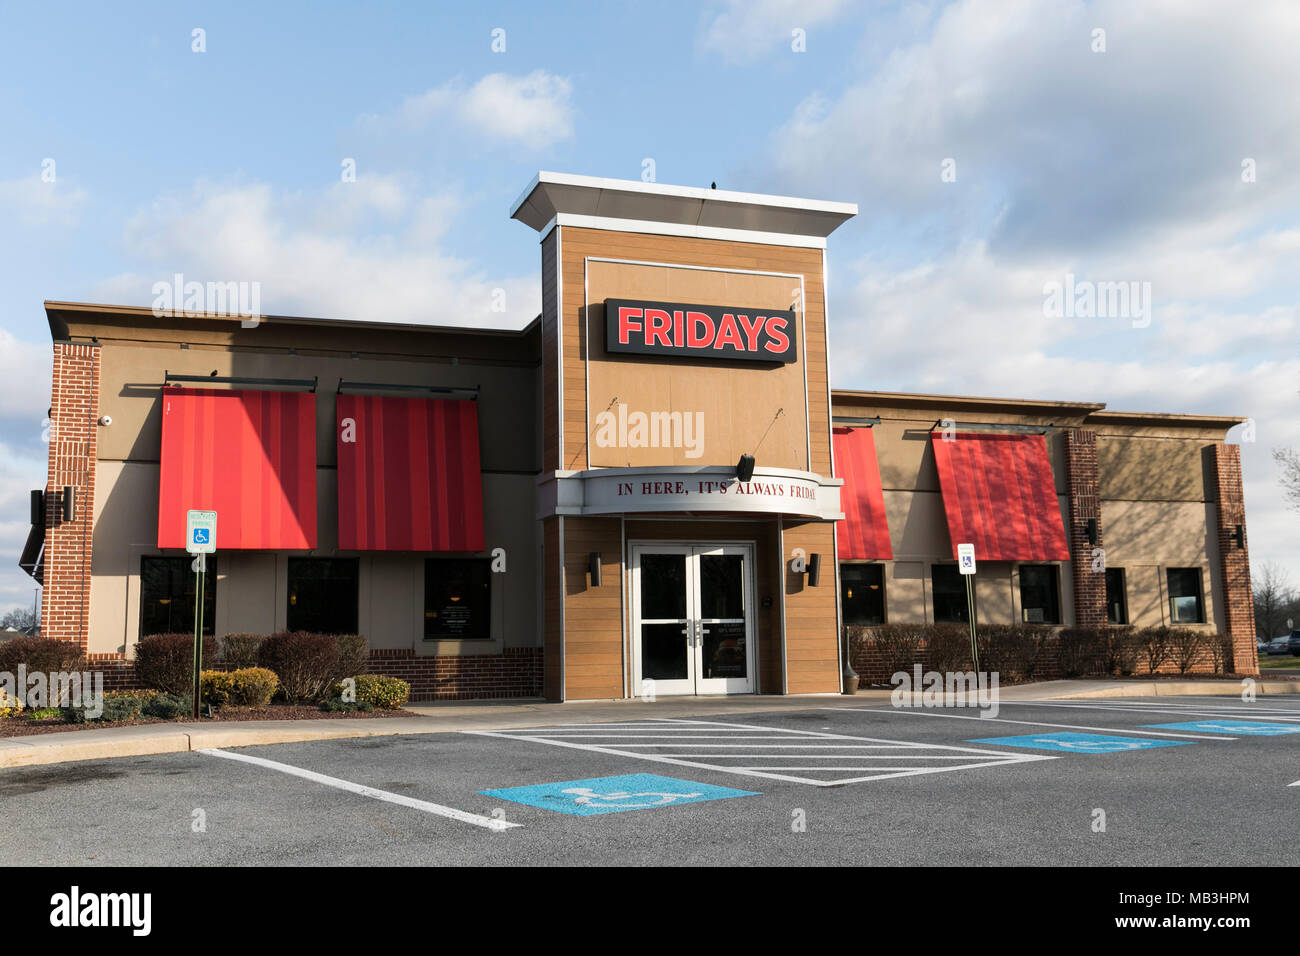 A TGI Fridays restaurant location in Hagerstown, Maryland on April 5, 2018. Stock Photo